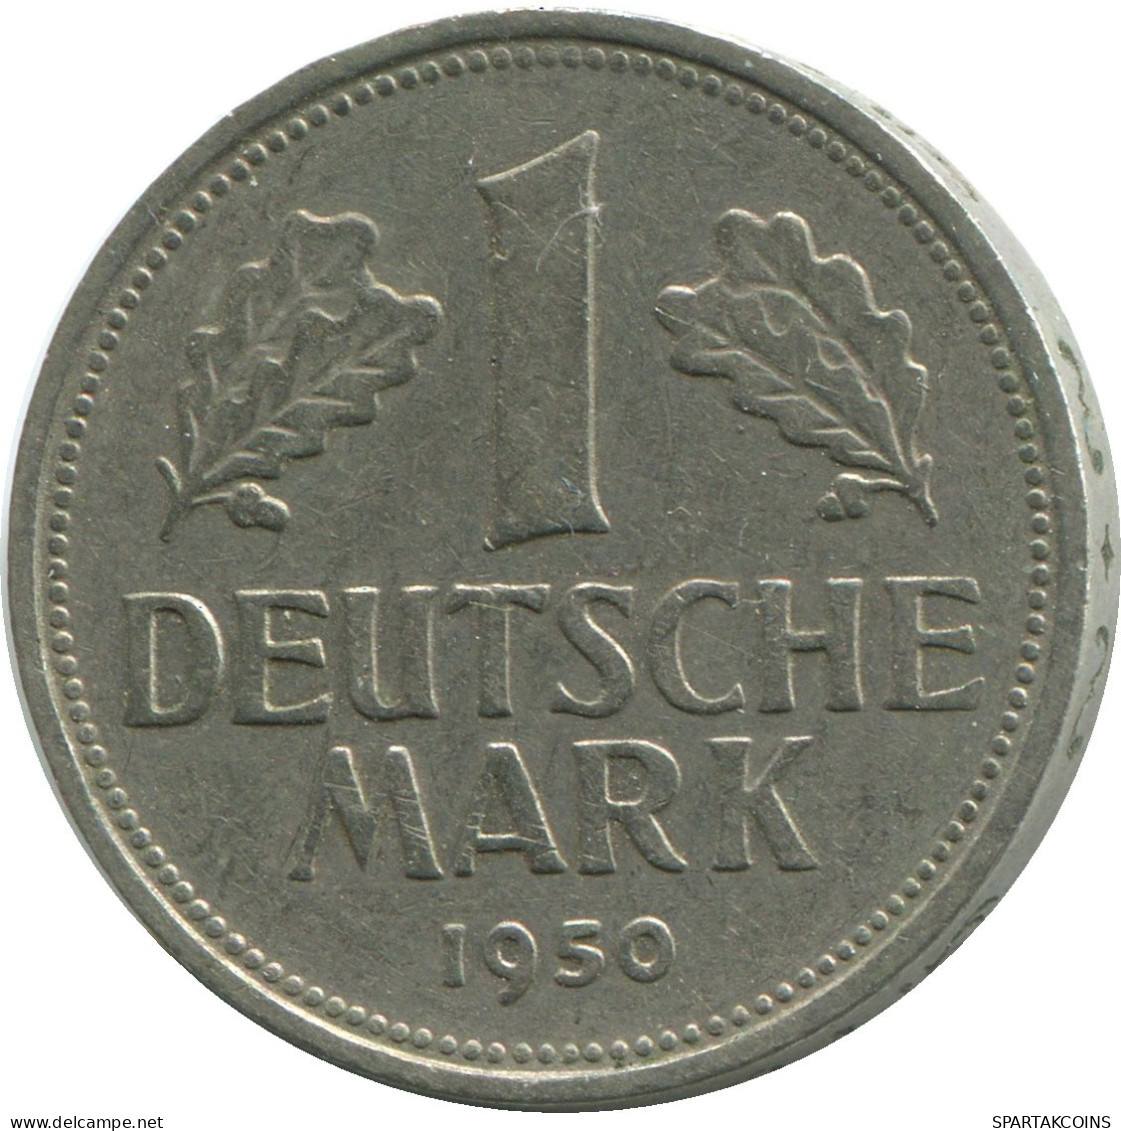 1 MARK 1950 G WEST & UNIFIED GERMANY Coin #DE10399.5.U.A - 1 Marco